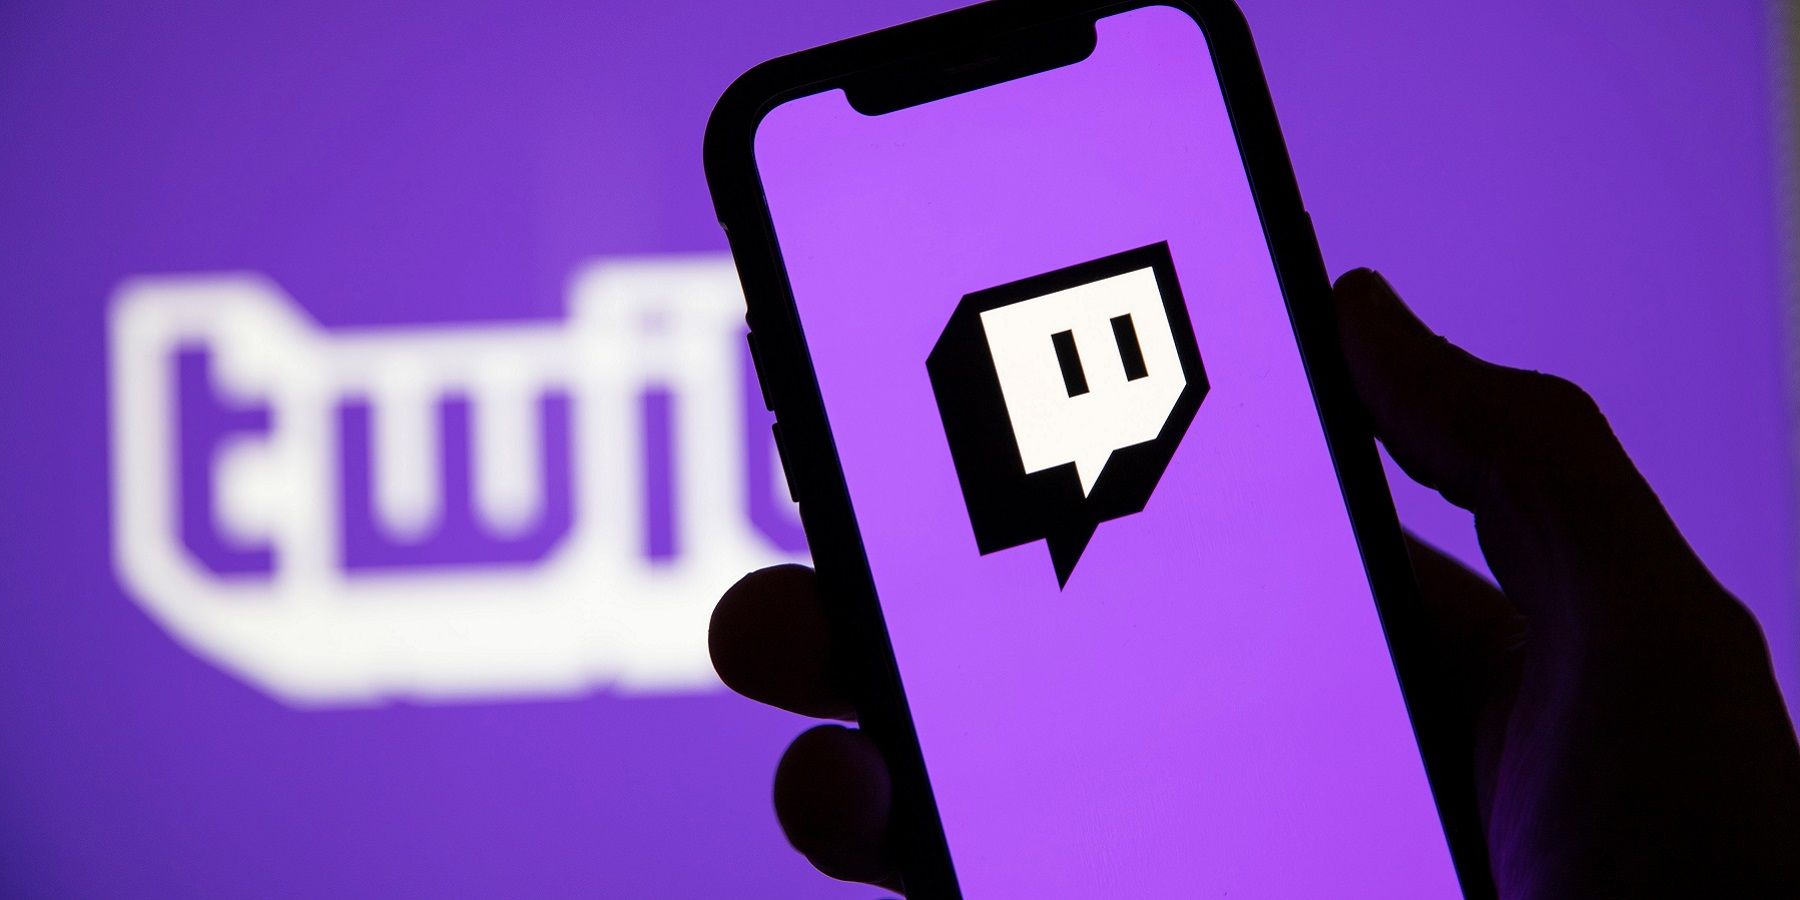 Picture of a phone with the Twitch logo on a bright purple screen.